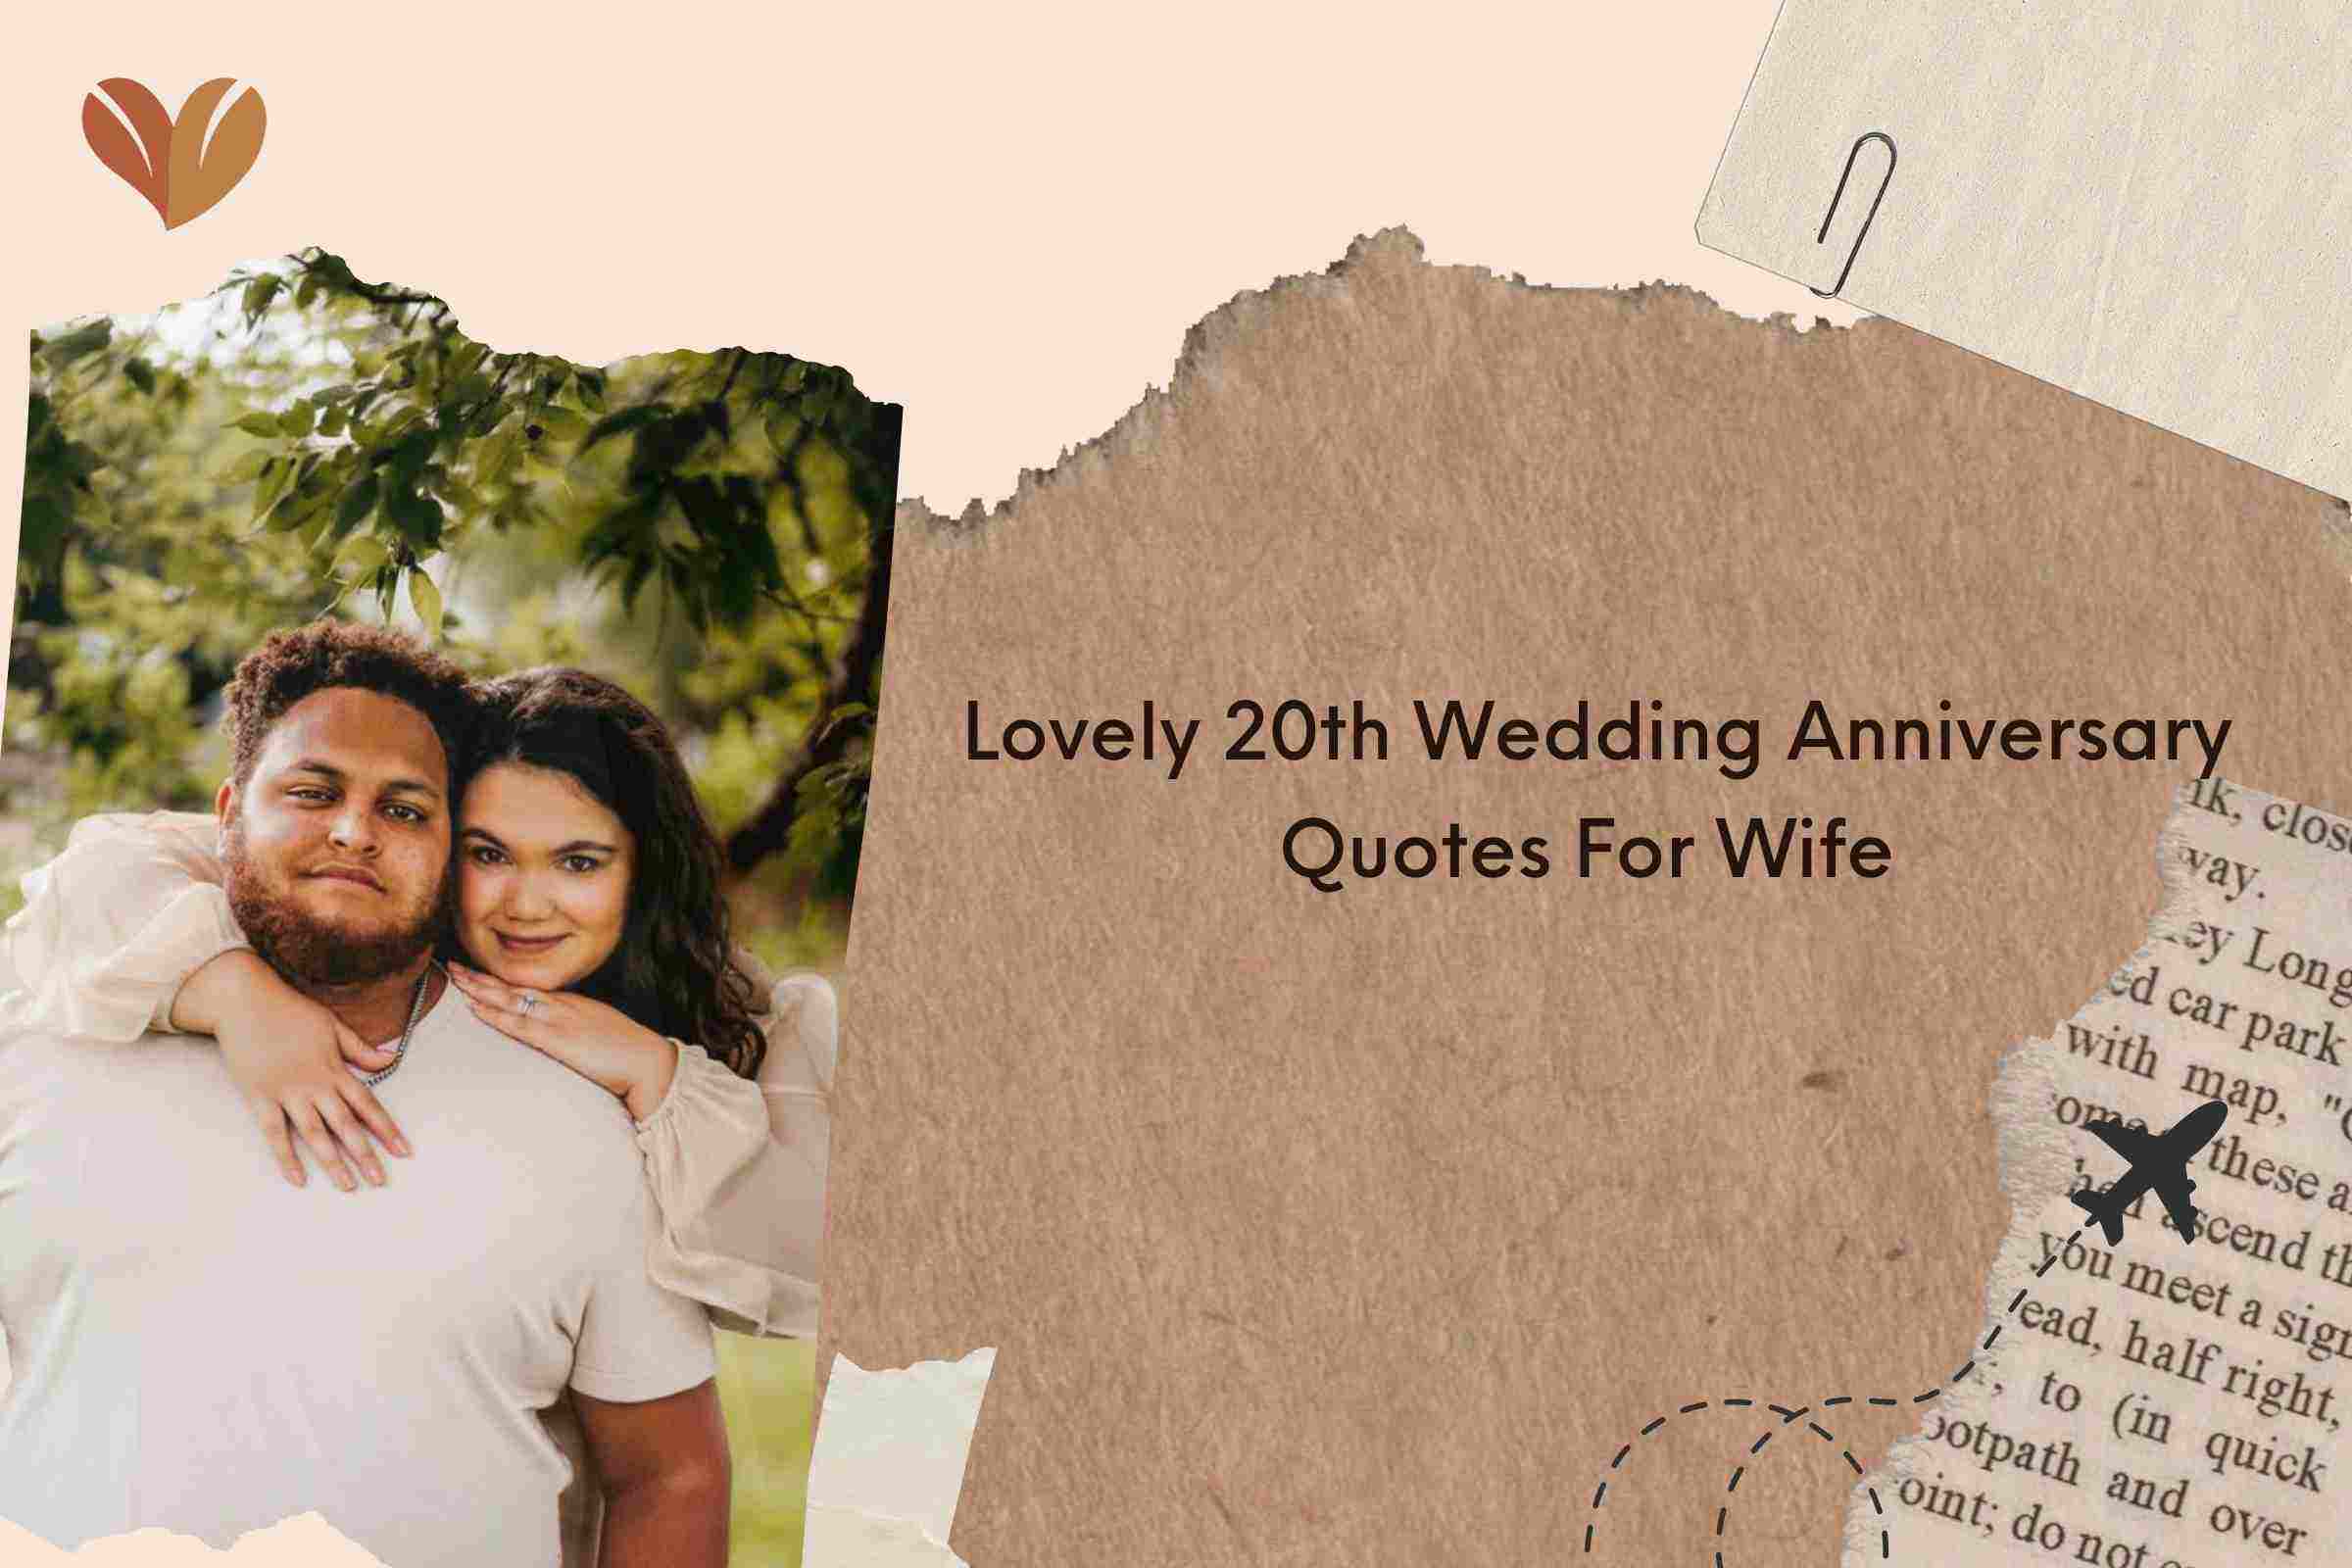 Lovely 20th Wedding Anniversary Quotes For Wife